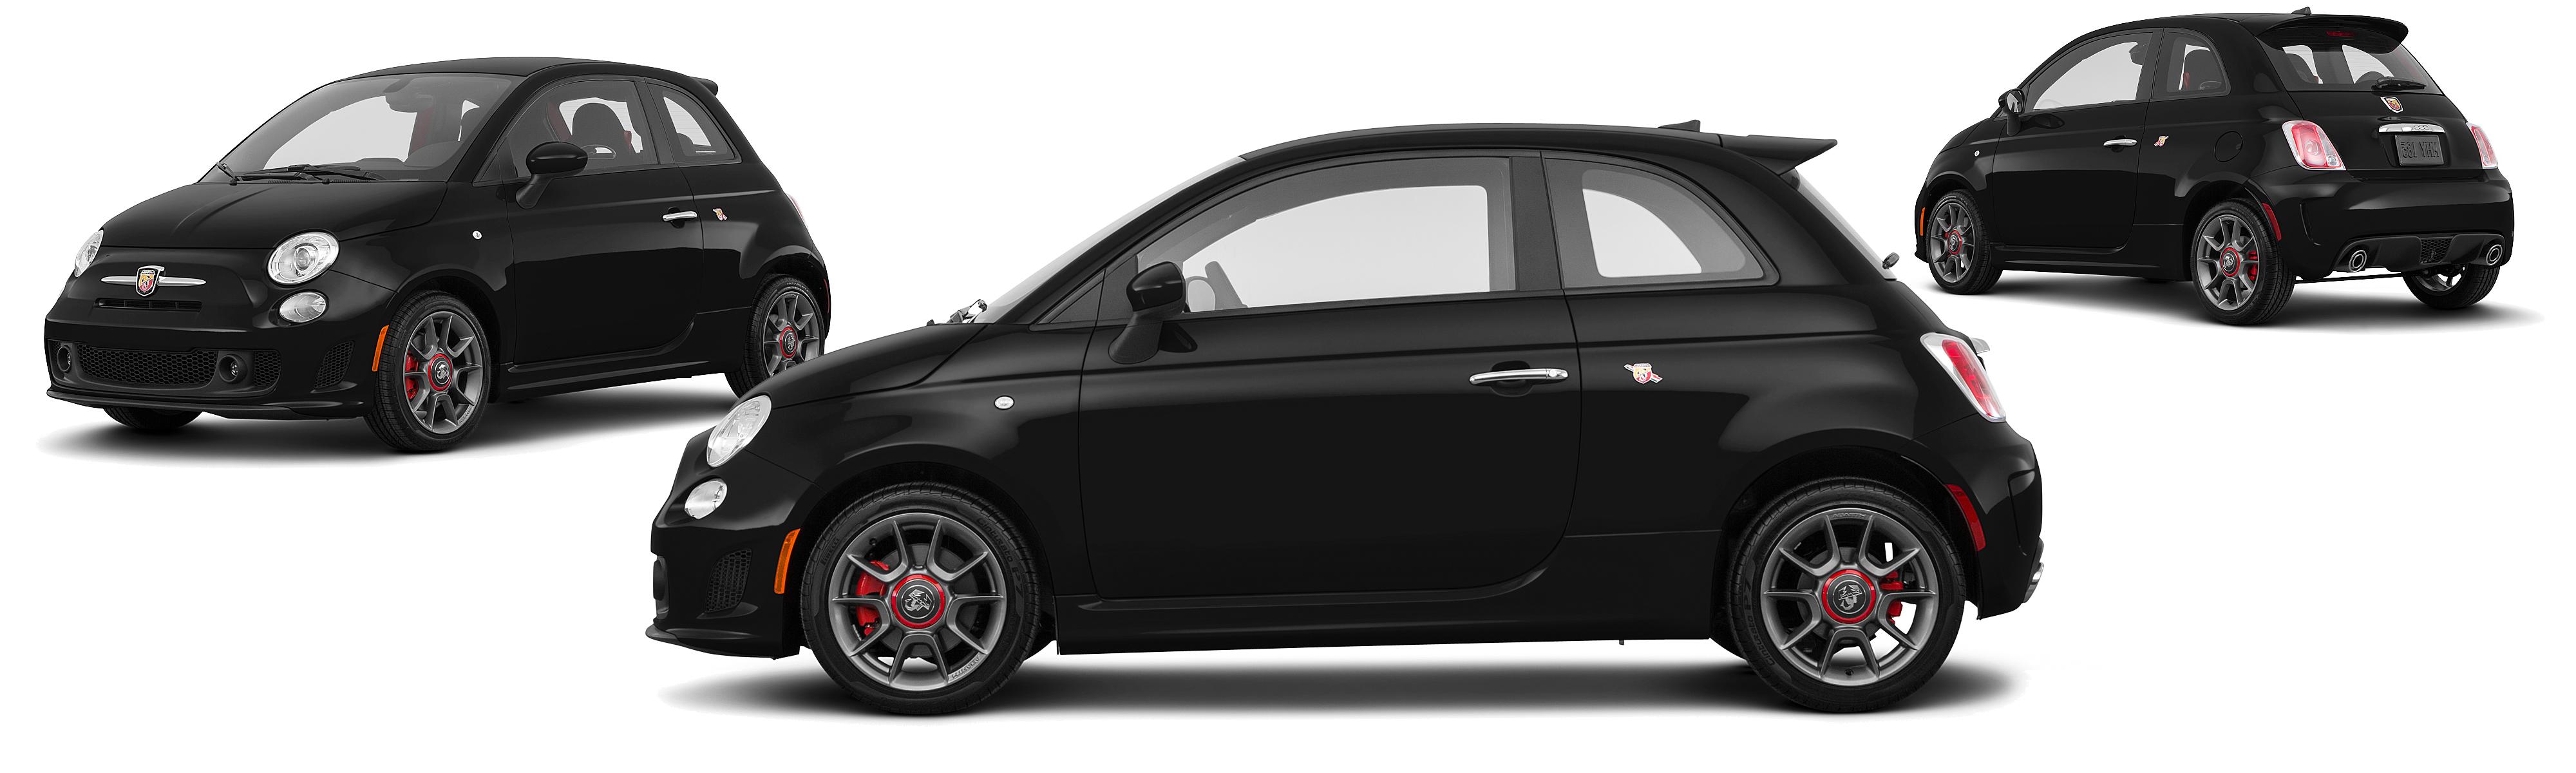 2016 FIAT 500 Easy 2dr Hatchback - Research - GrooveCar